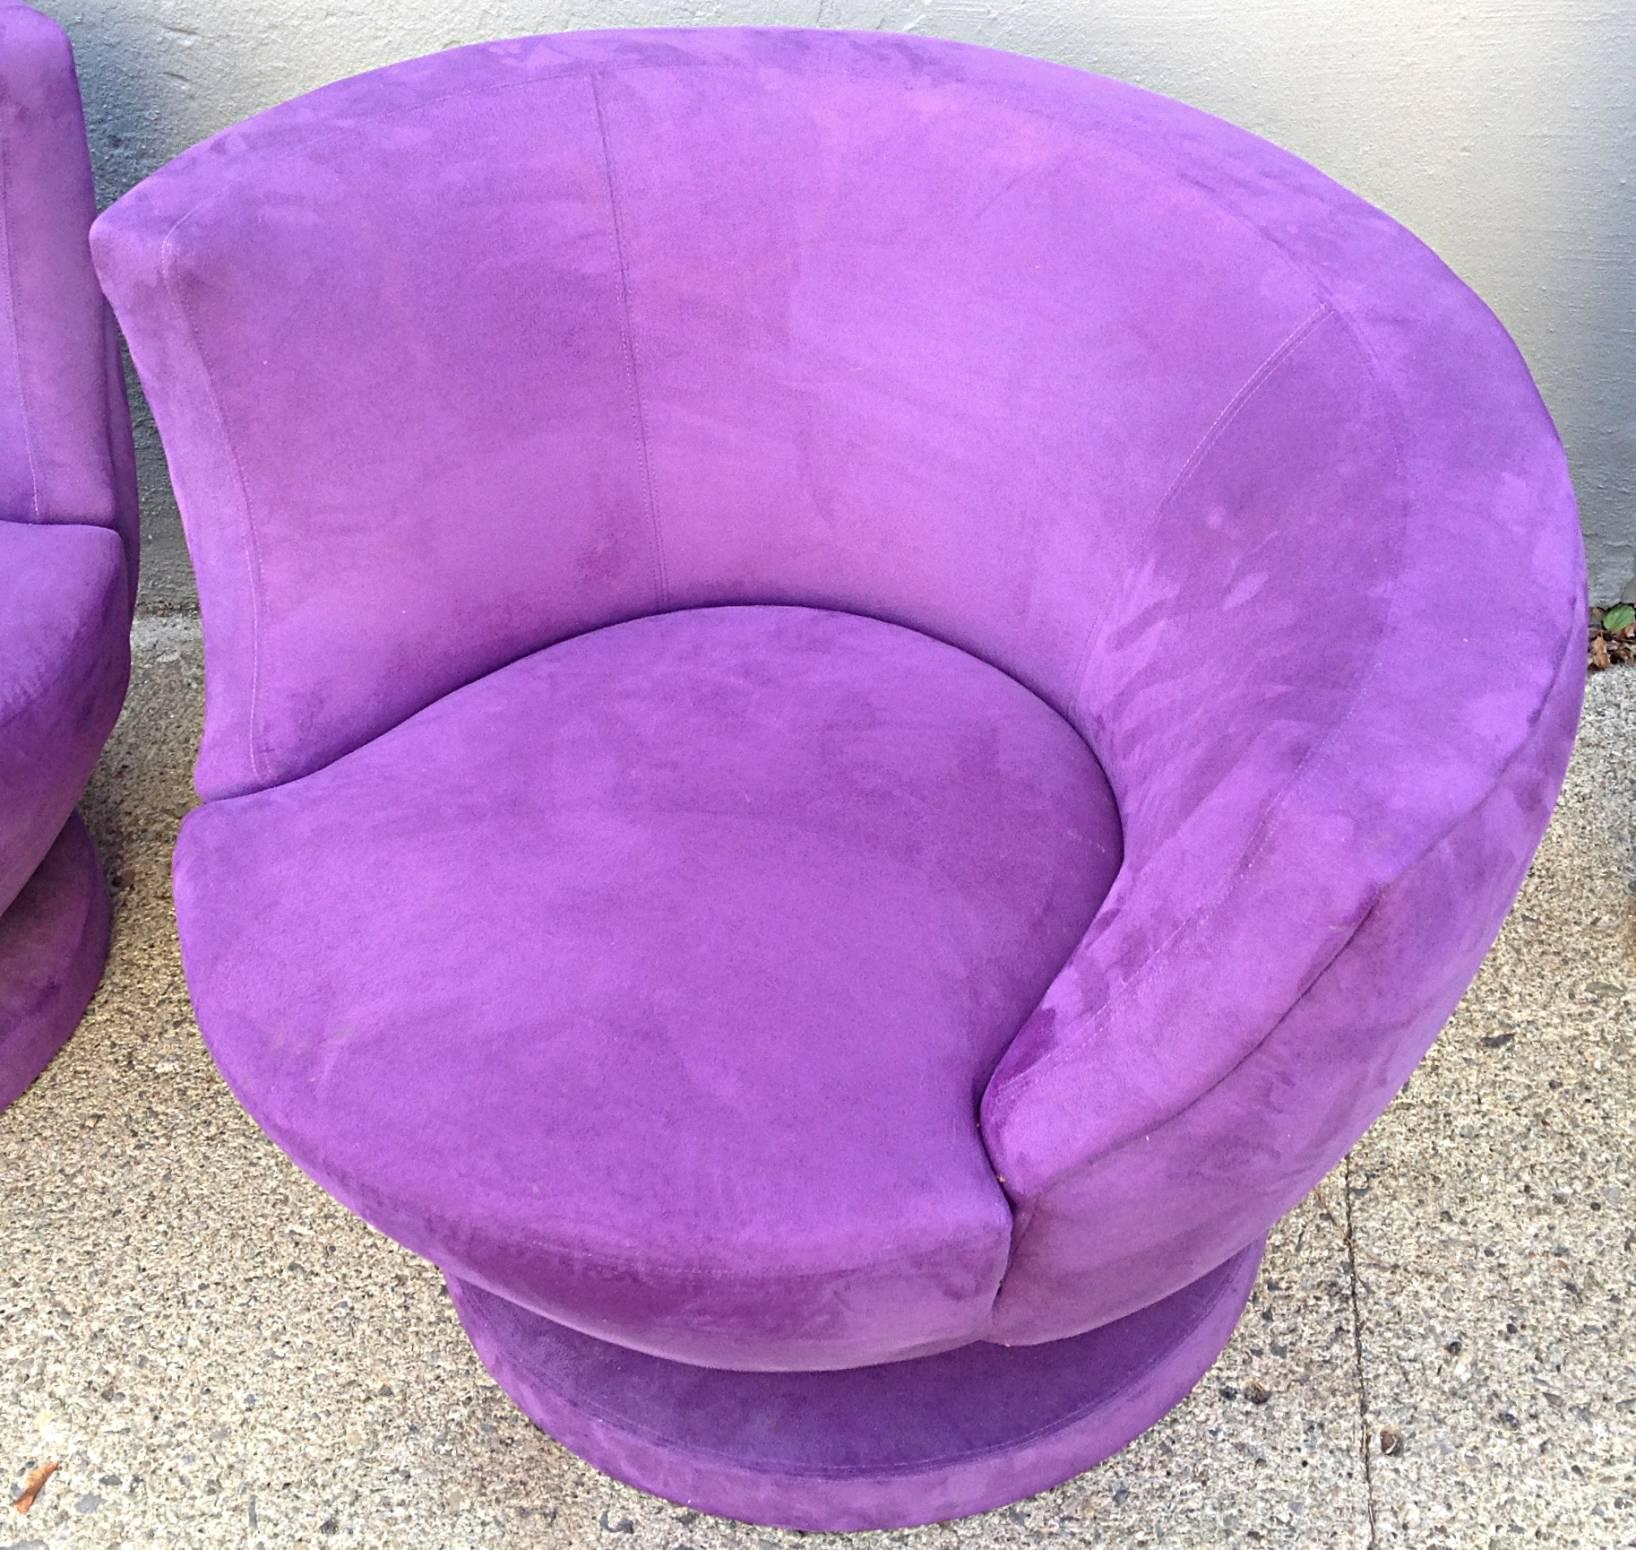 A wonderful pair of swivel chairs by Directional consisting of a right and left chair executed in a purple grape ultra-suede. A modified Nautilus chair with upholstered base and memory swivel function. Very good condition, minor wear.